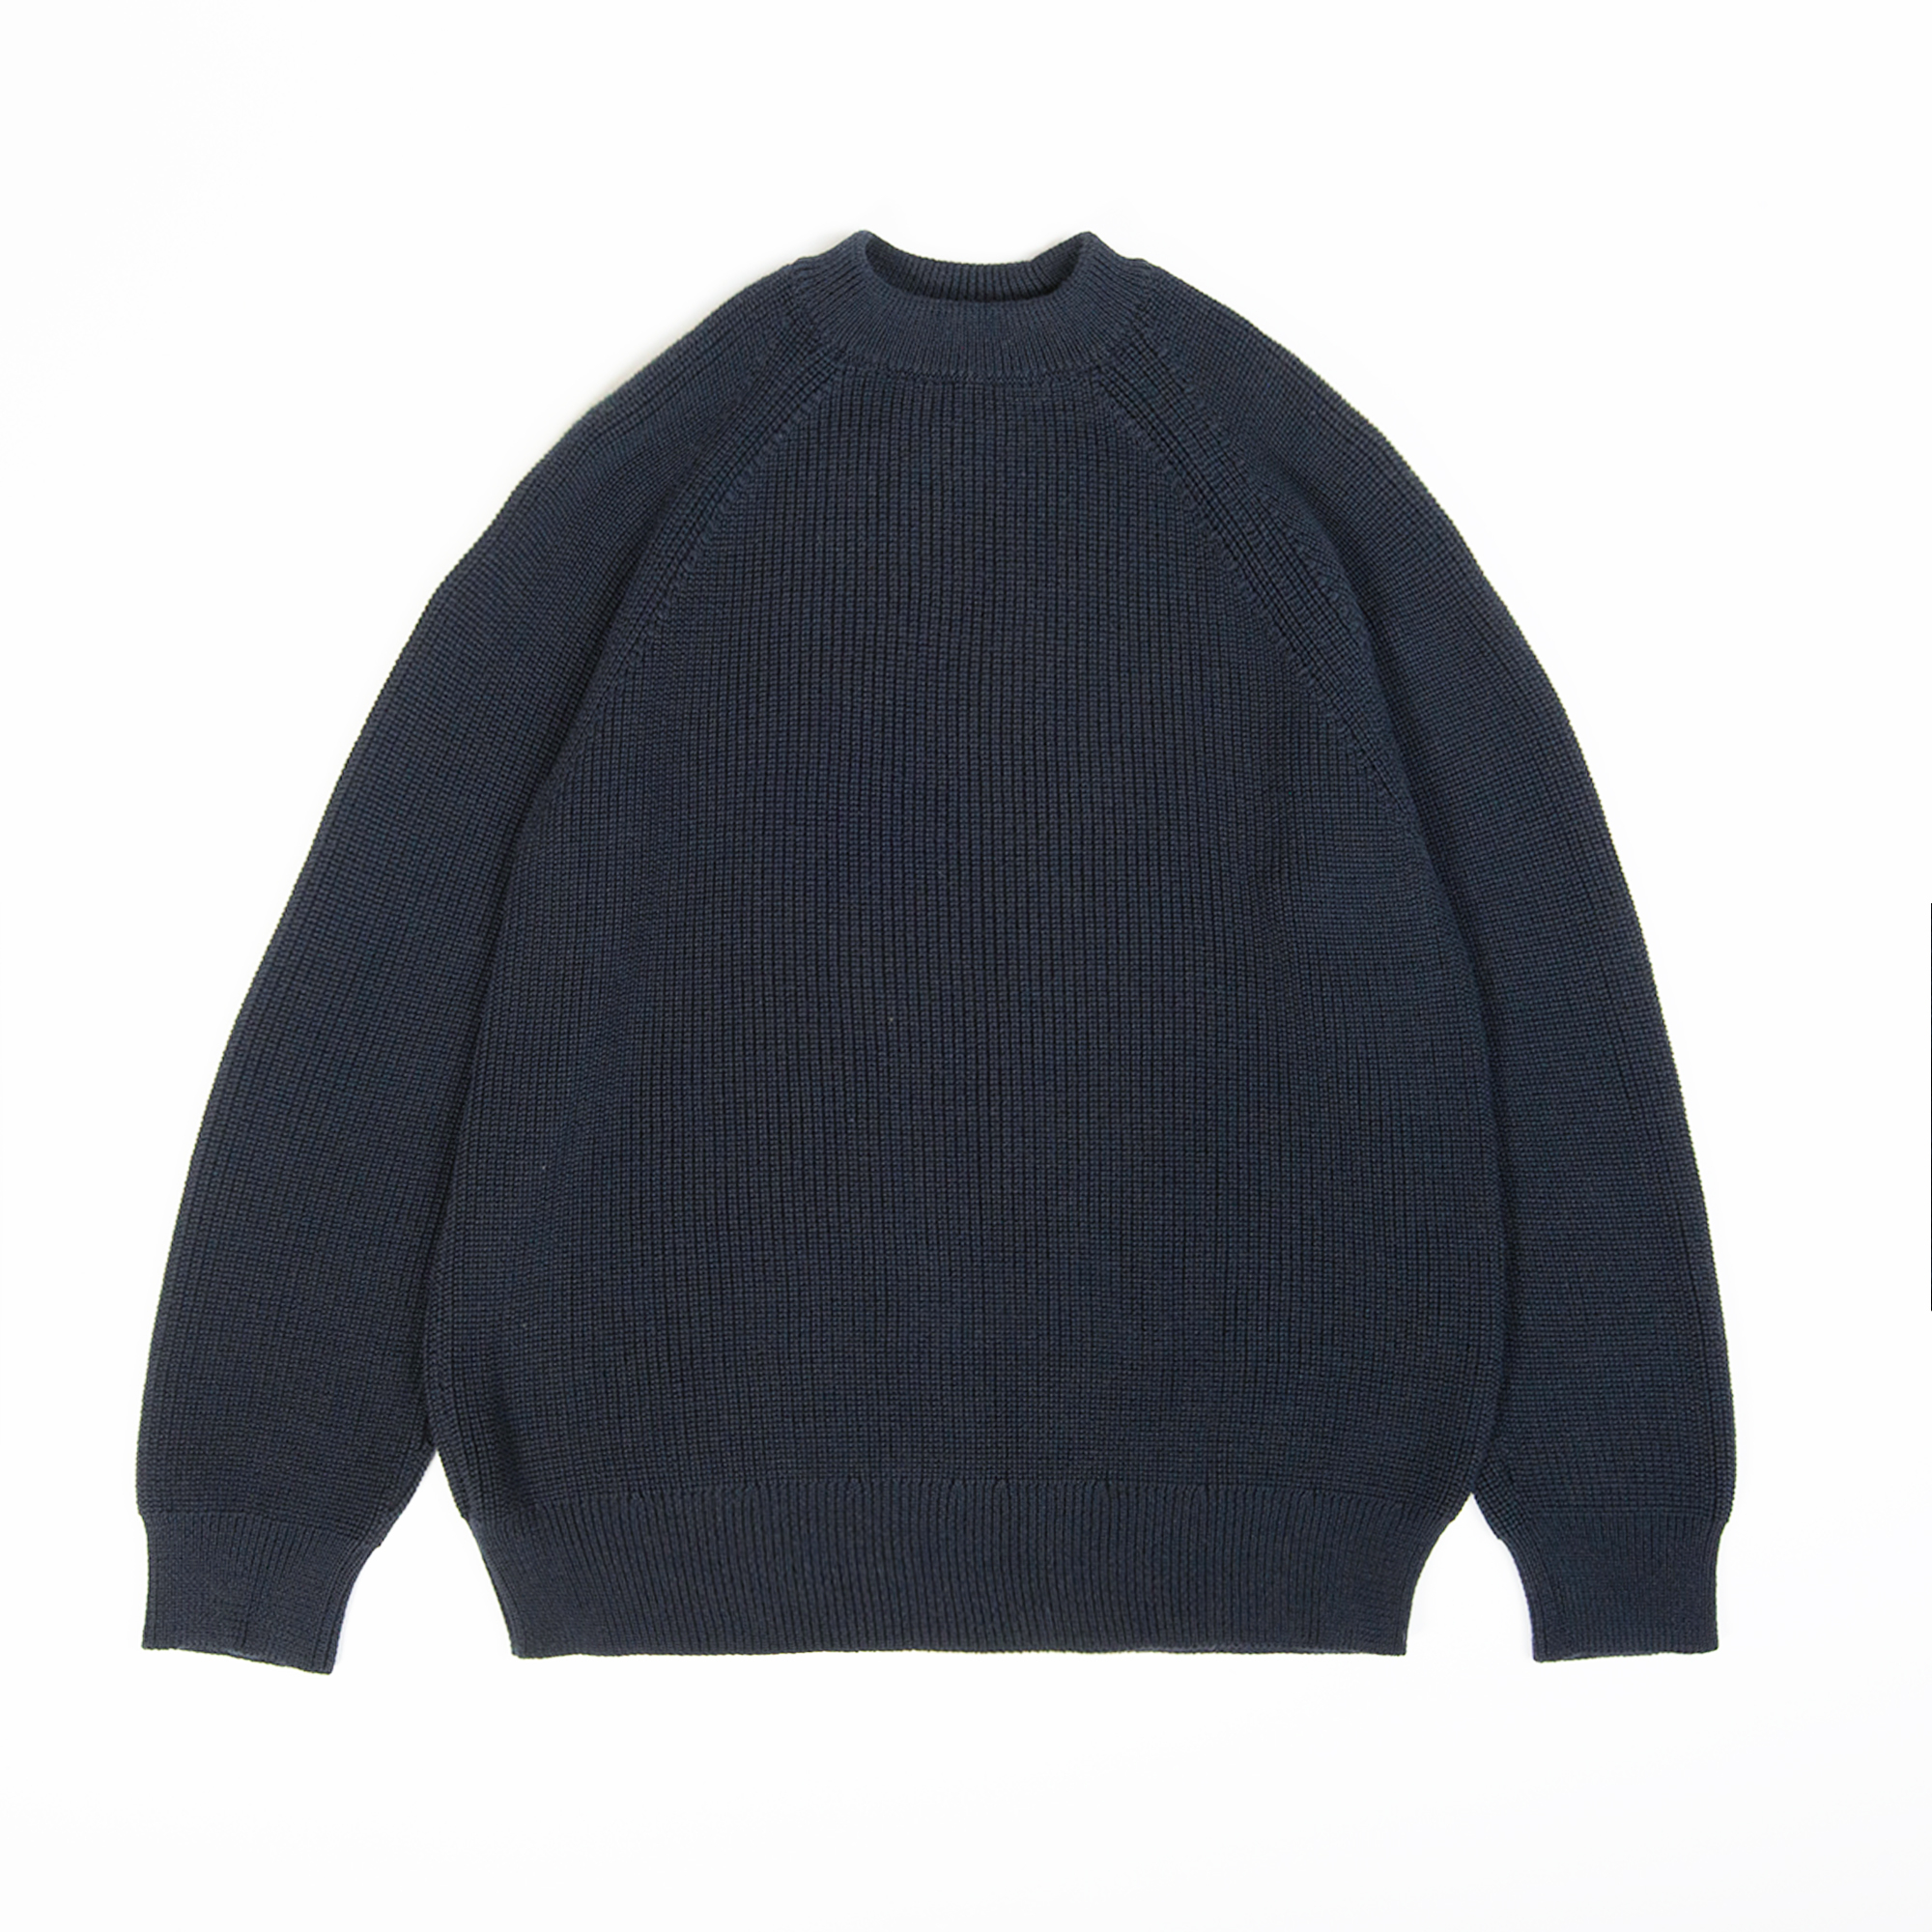 PLANO sweater in Midnight color by Arpenteur